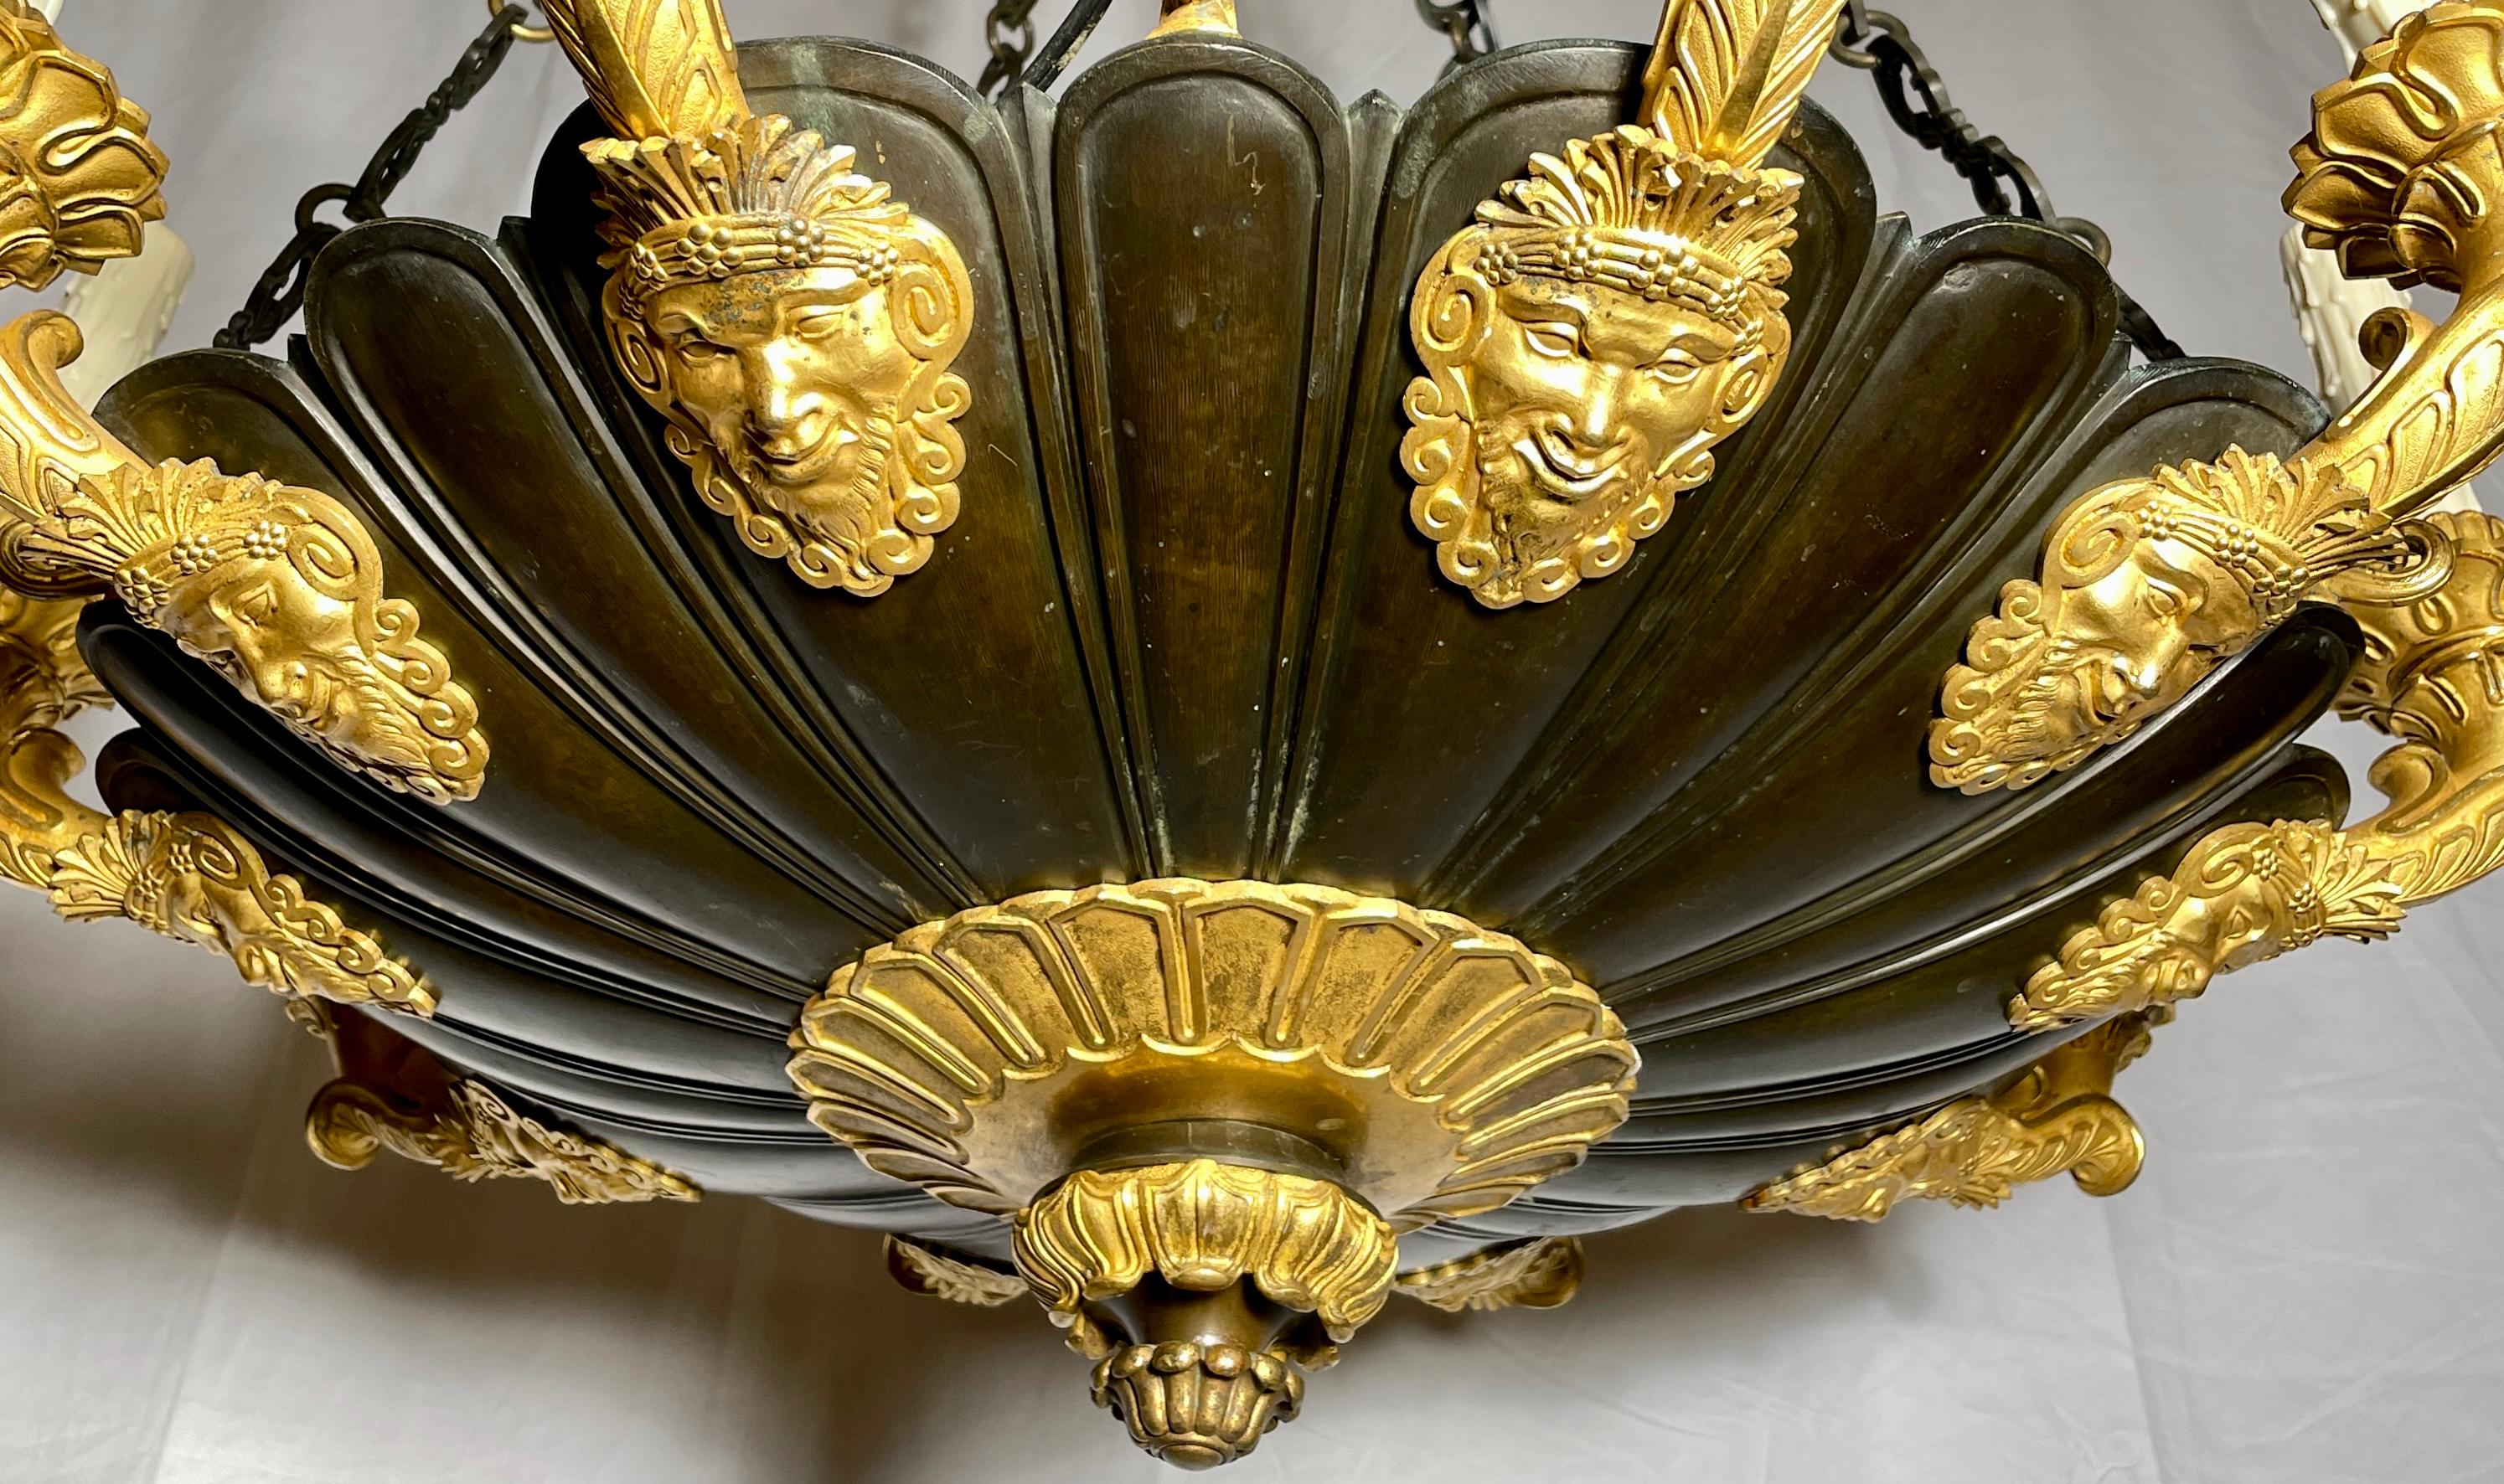 Antique 19th Century French Empire Patinated Bronze & Ormolu Chandelier Ca. 1880 For Sale 1